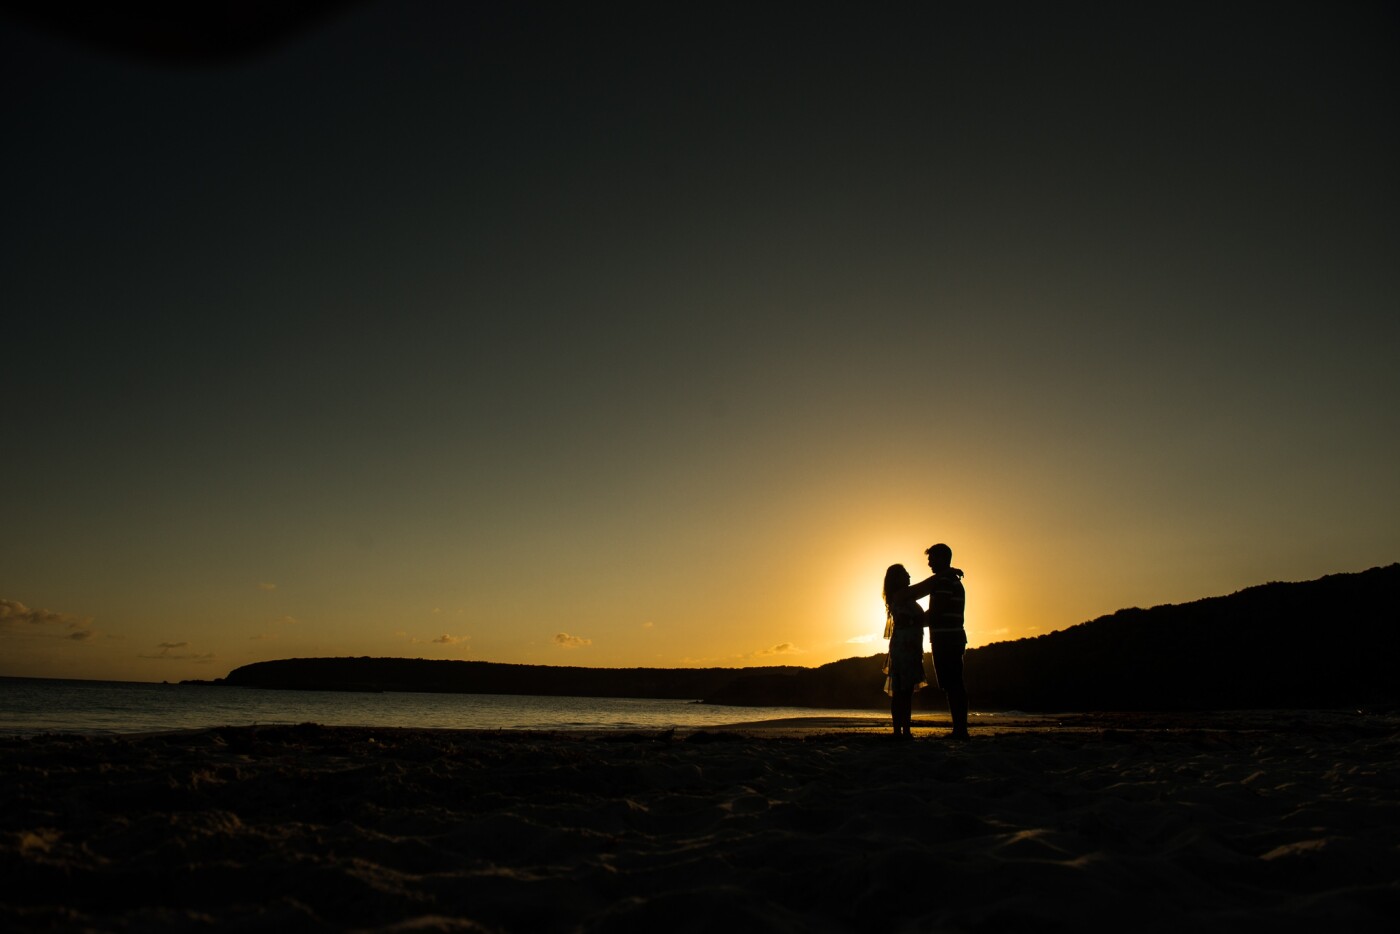 I shot this photo at Vieques, Puerto Rico when I was traveling with my wife. It's a self portrait of us. The beautiful Caracas beach, the amazing white sand and the wonderful sunset behind us was such a beauty that one had to see to believe!<br />
But, grabbing a silhouette was even better.